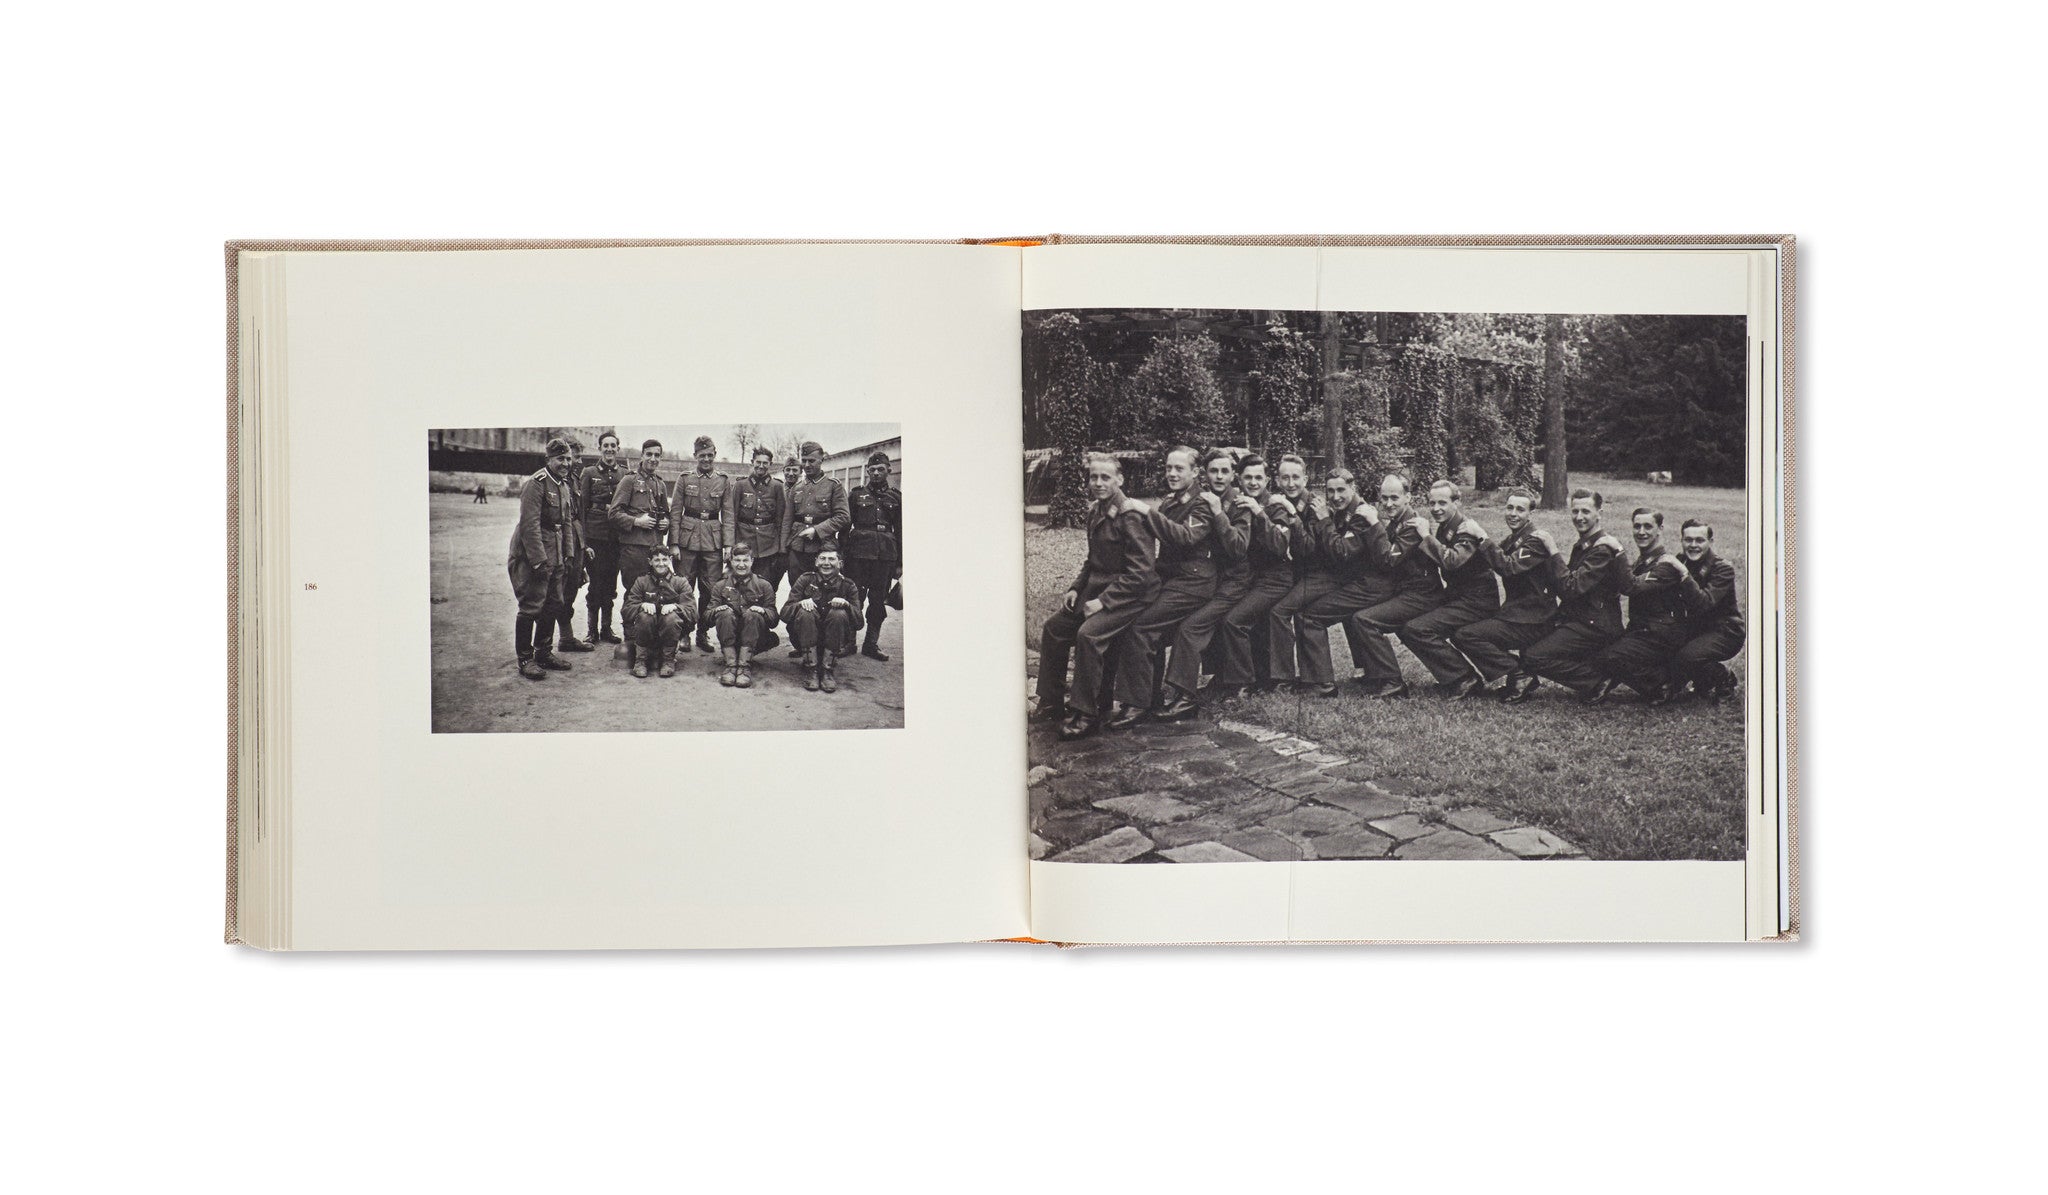 NEIN, ONKEL: SNAPSHOTS FROM ANOTHER FRONT 1938–1945 by Ed Jones & Timothy Prus